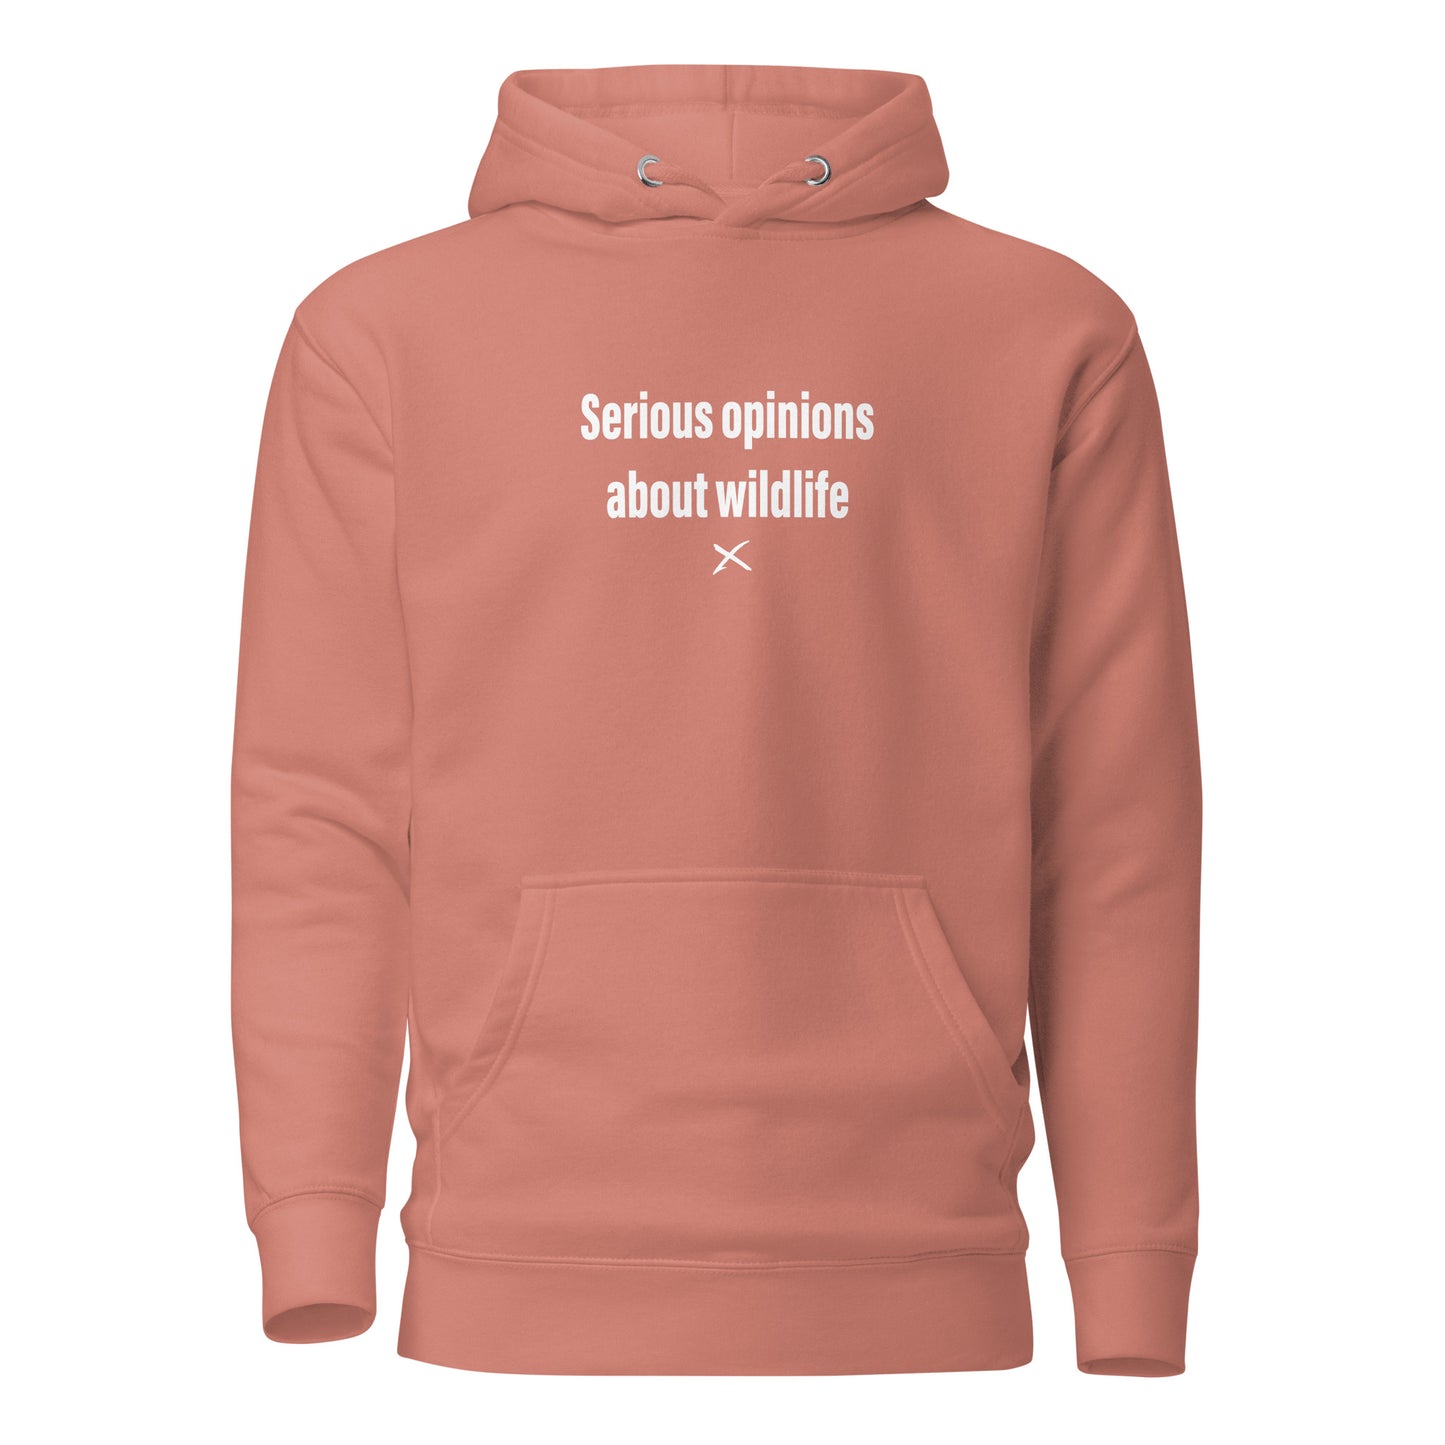 Serious opinions about wildlife - Hoodie